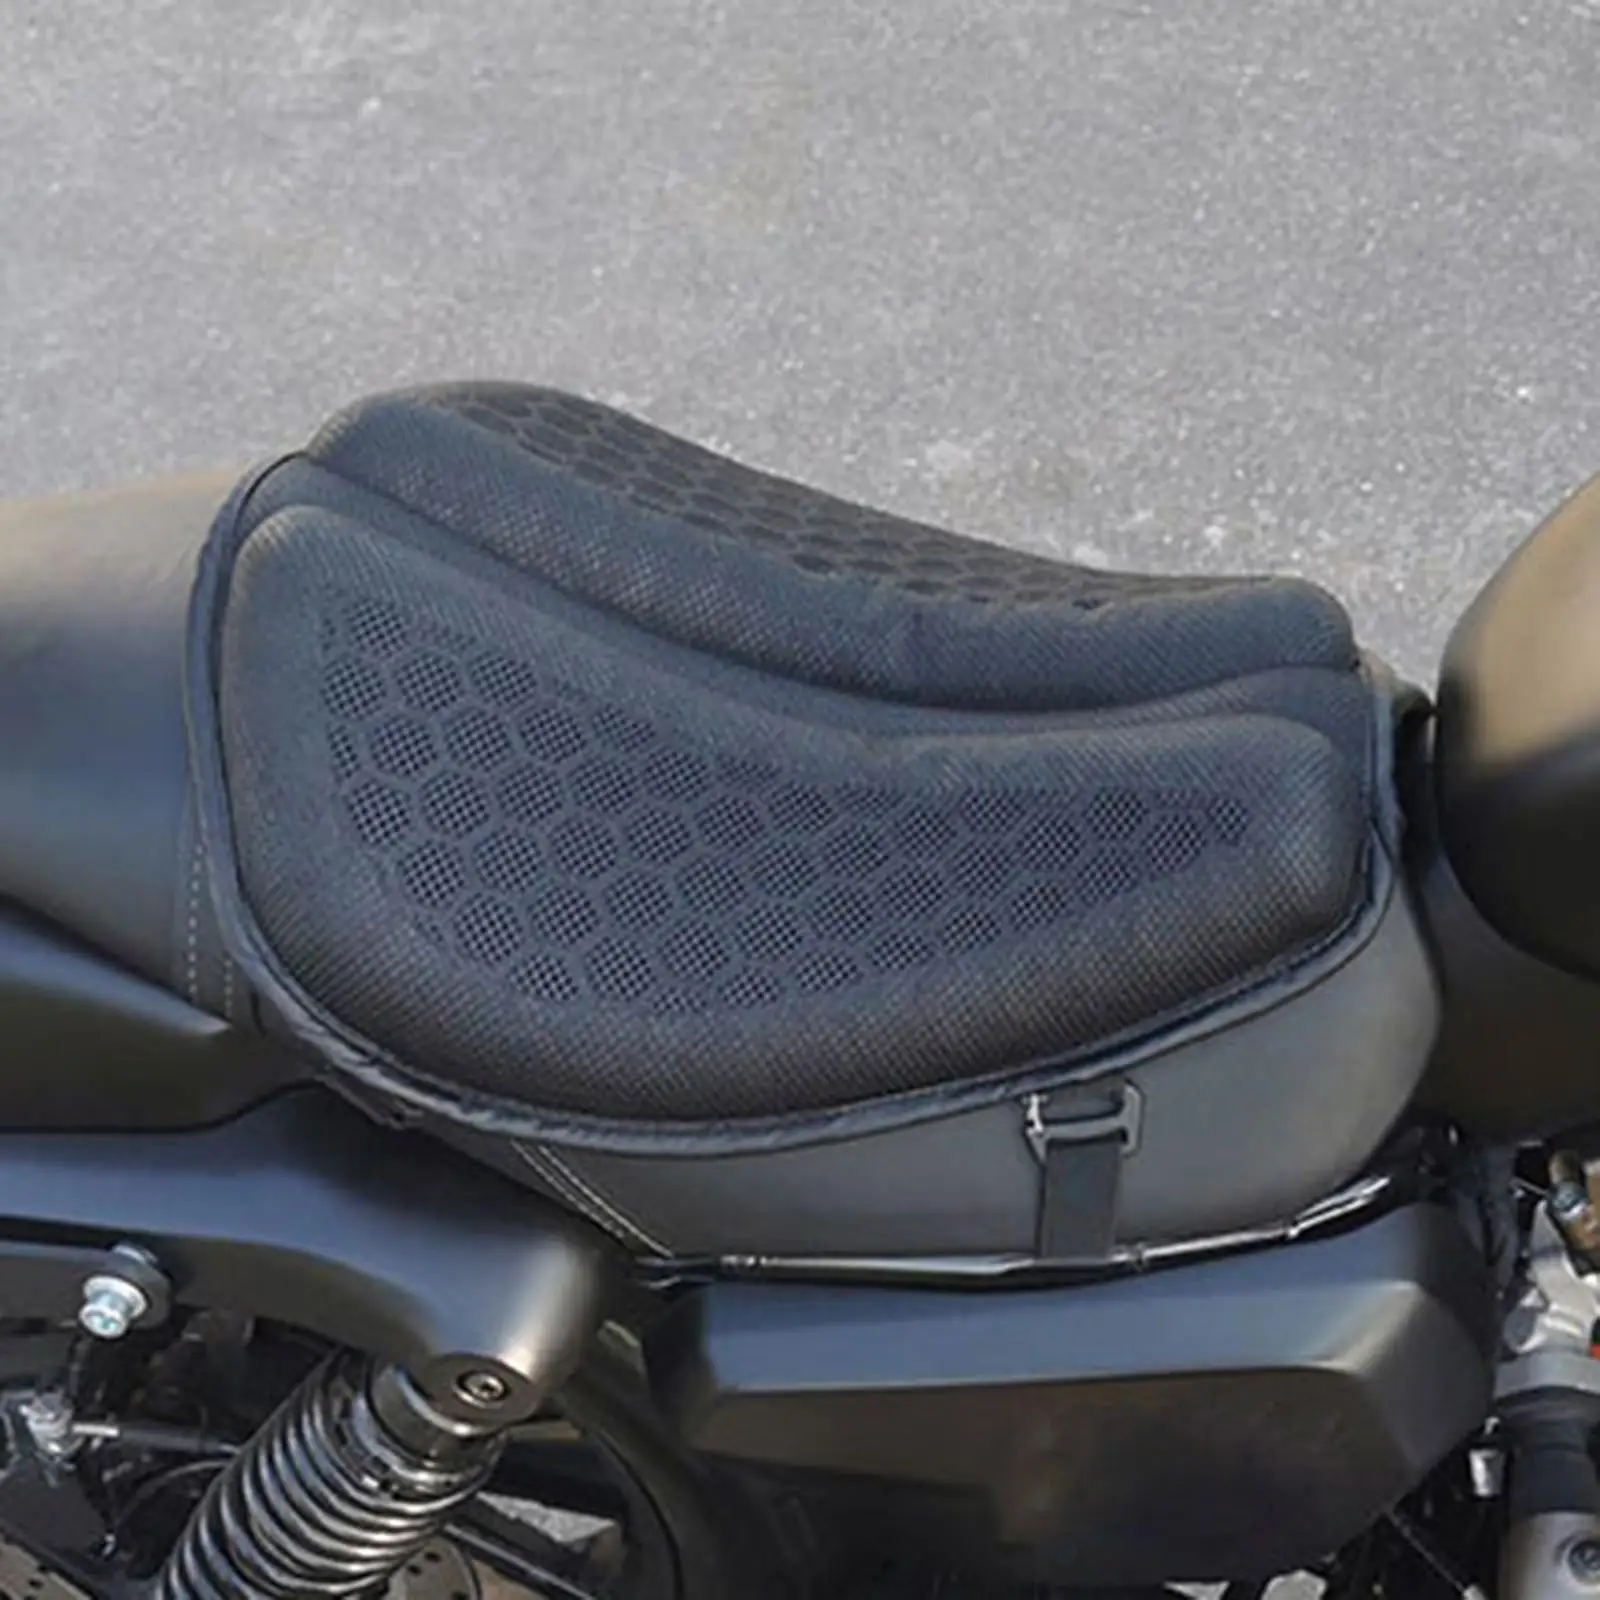 Motorbike Seat Cushion, Shock Absorption for Electric Cars Motorbikes Long Distance Riding